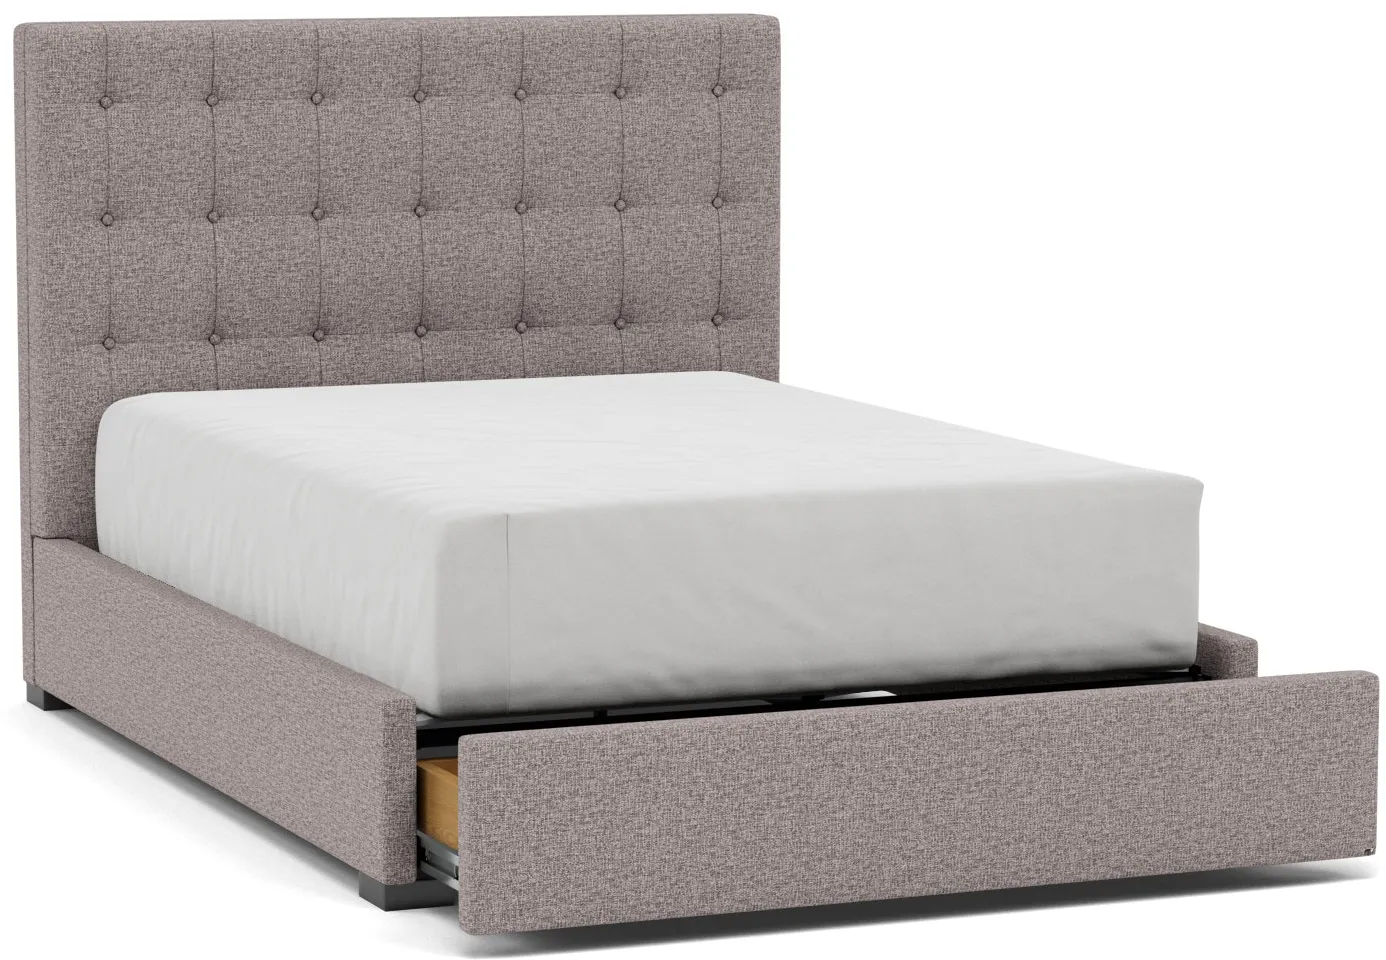 Abby Queen Upholstered Storage Bed in Tech Oak